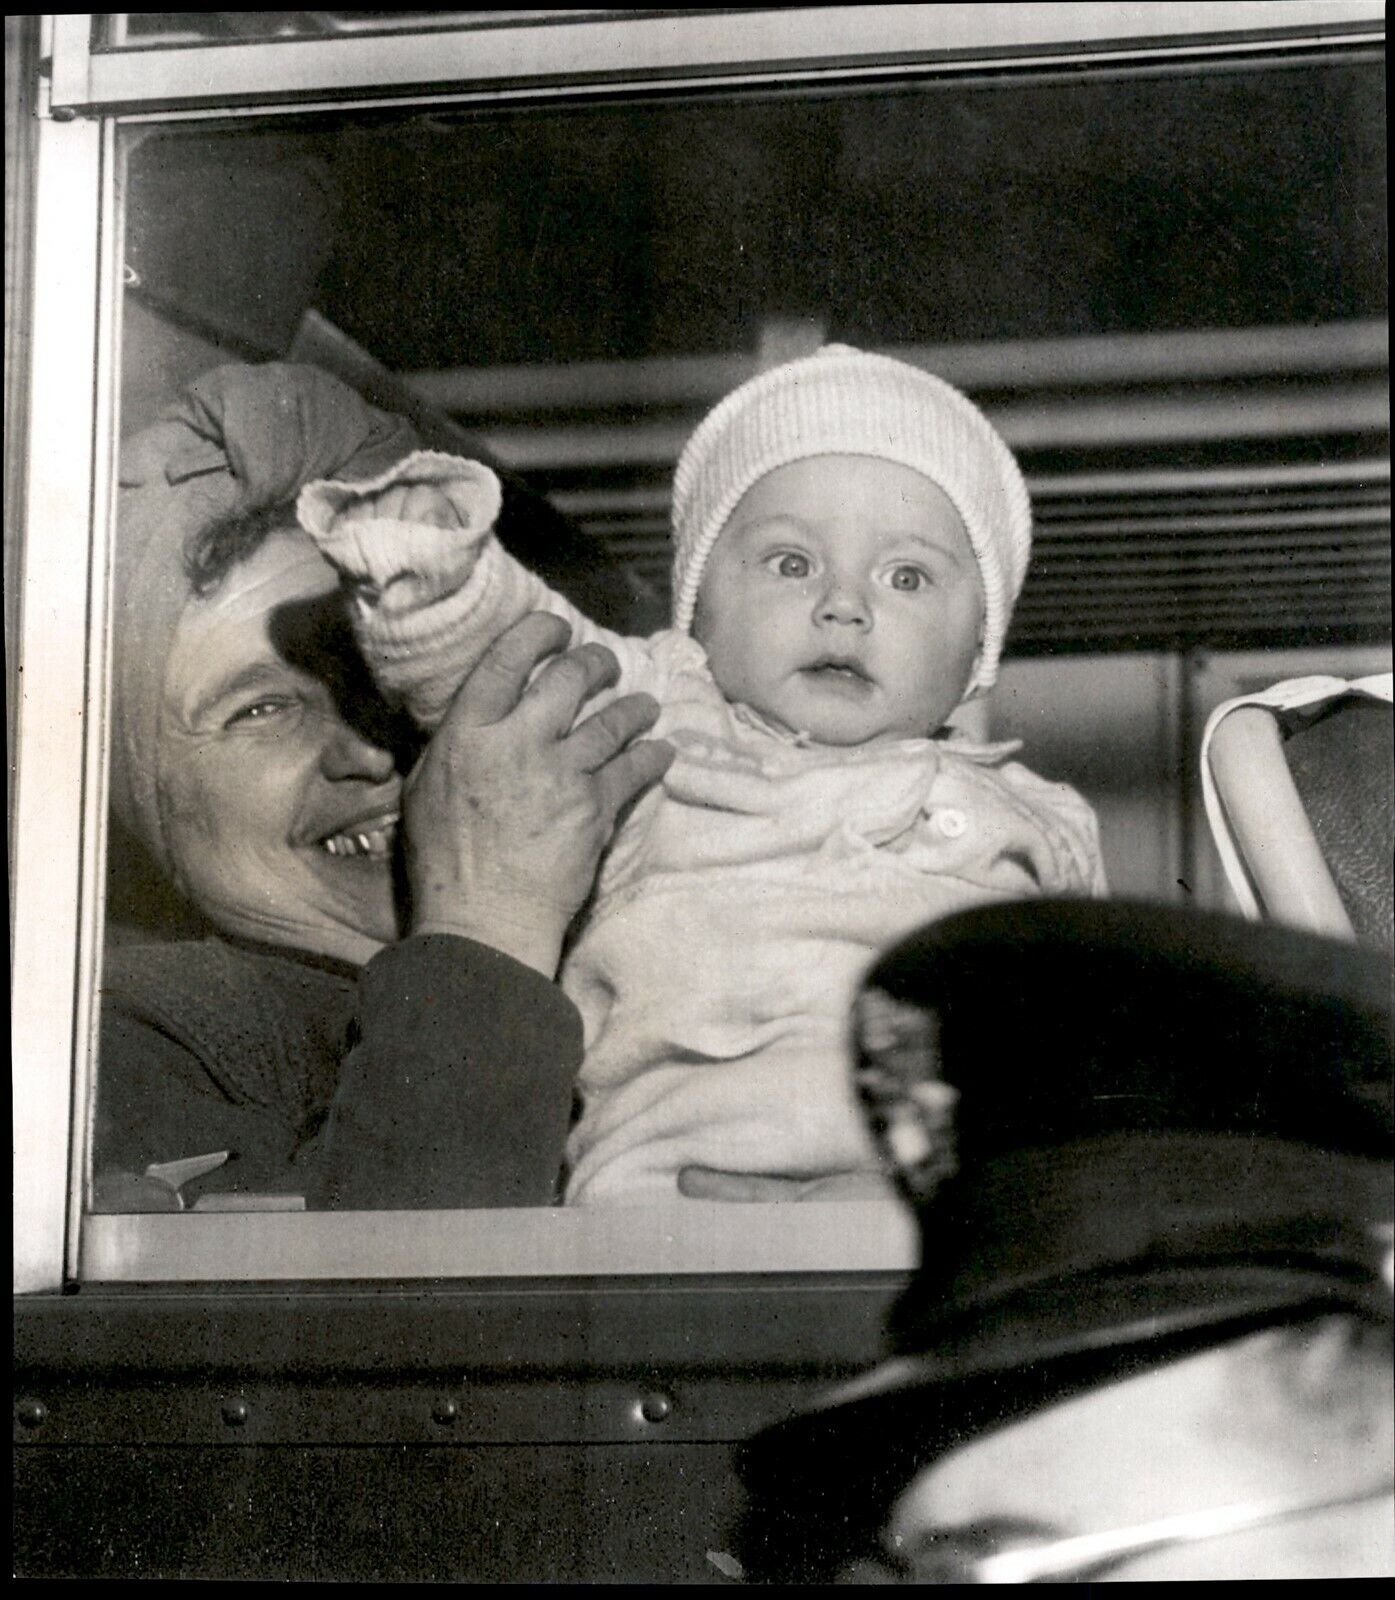 LG921 1956 AP Wire Photo HUNGARIAN BABY ON U.S. ARMY BUS FORT DIX NJ REFUGEES